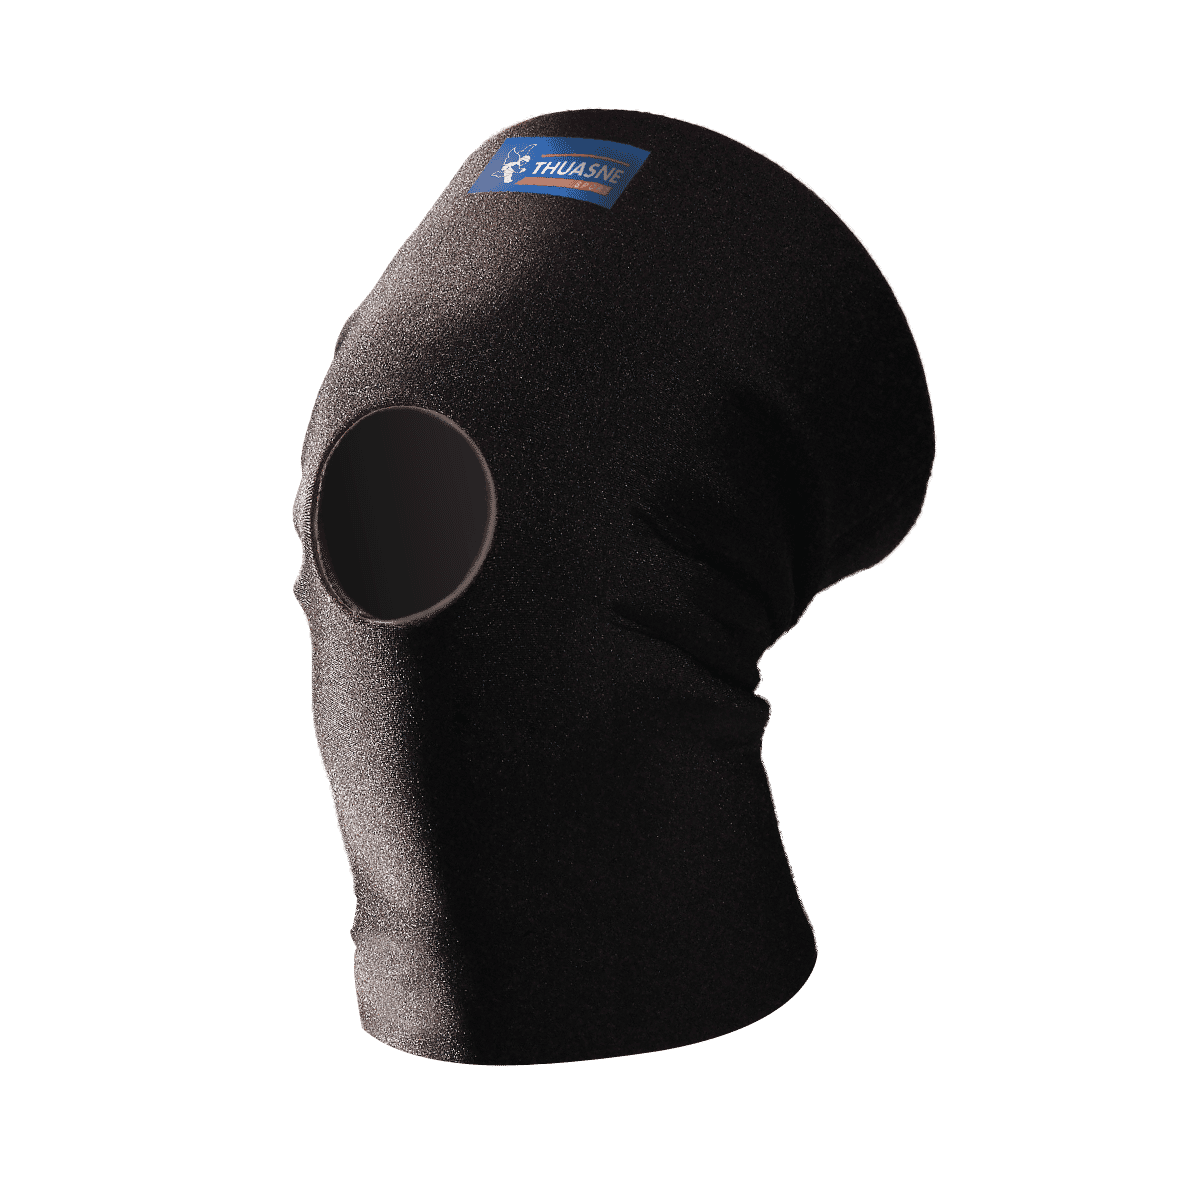 Thuasne Genouillère Strapping Noir Protections articulaires : Snowleader